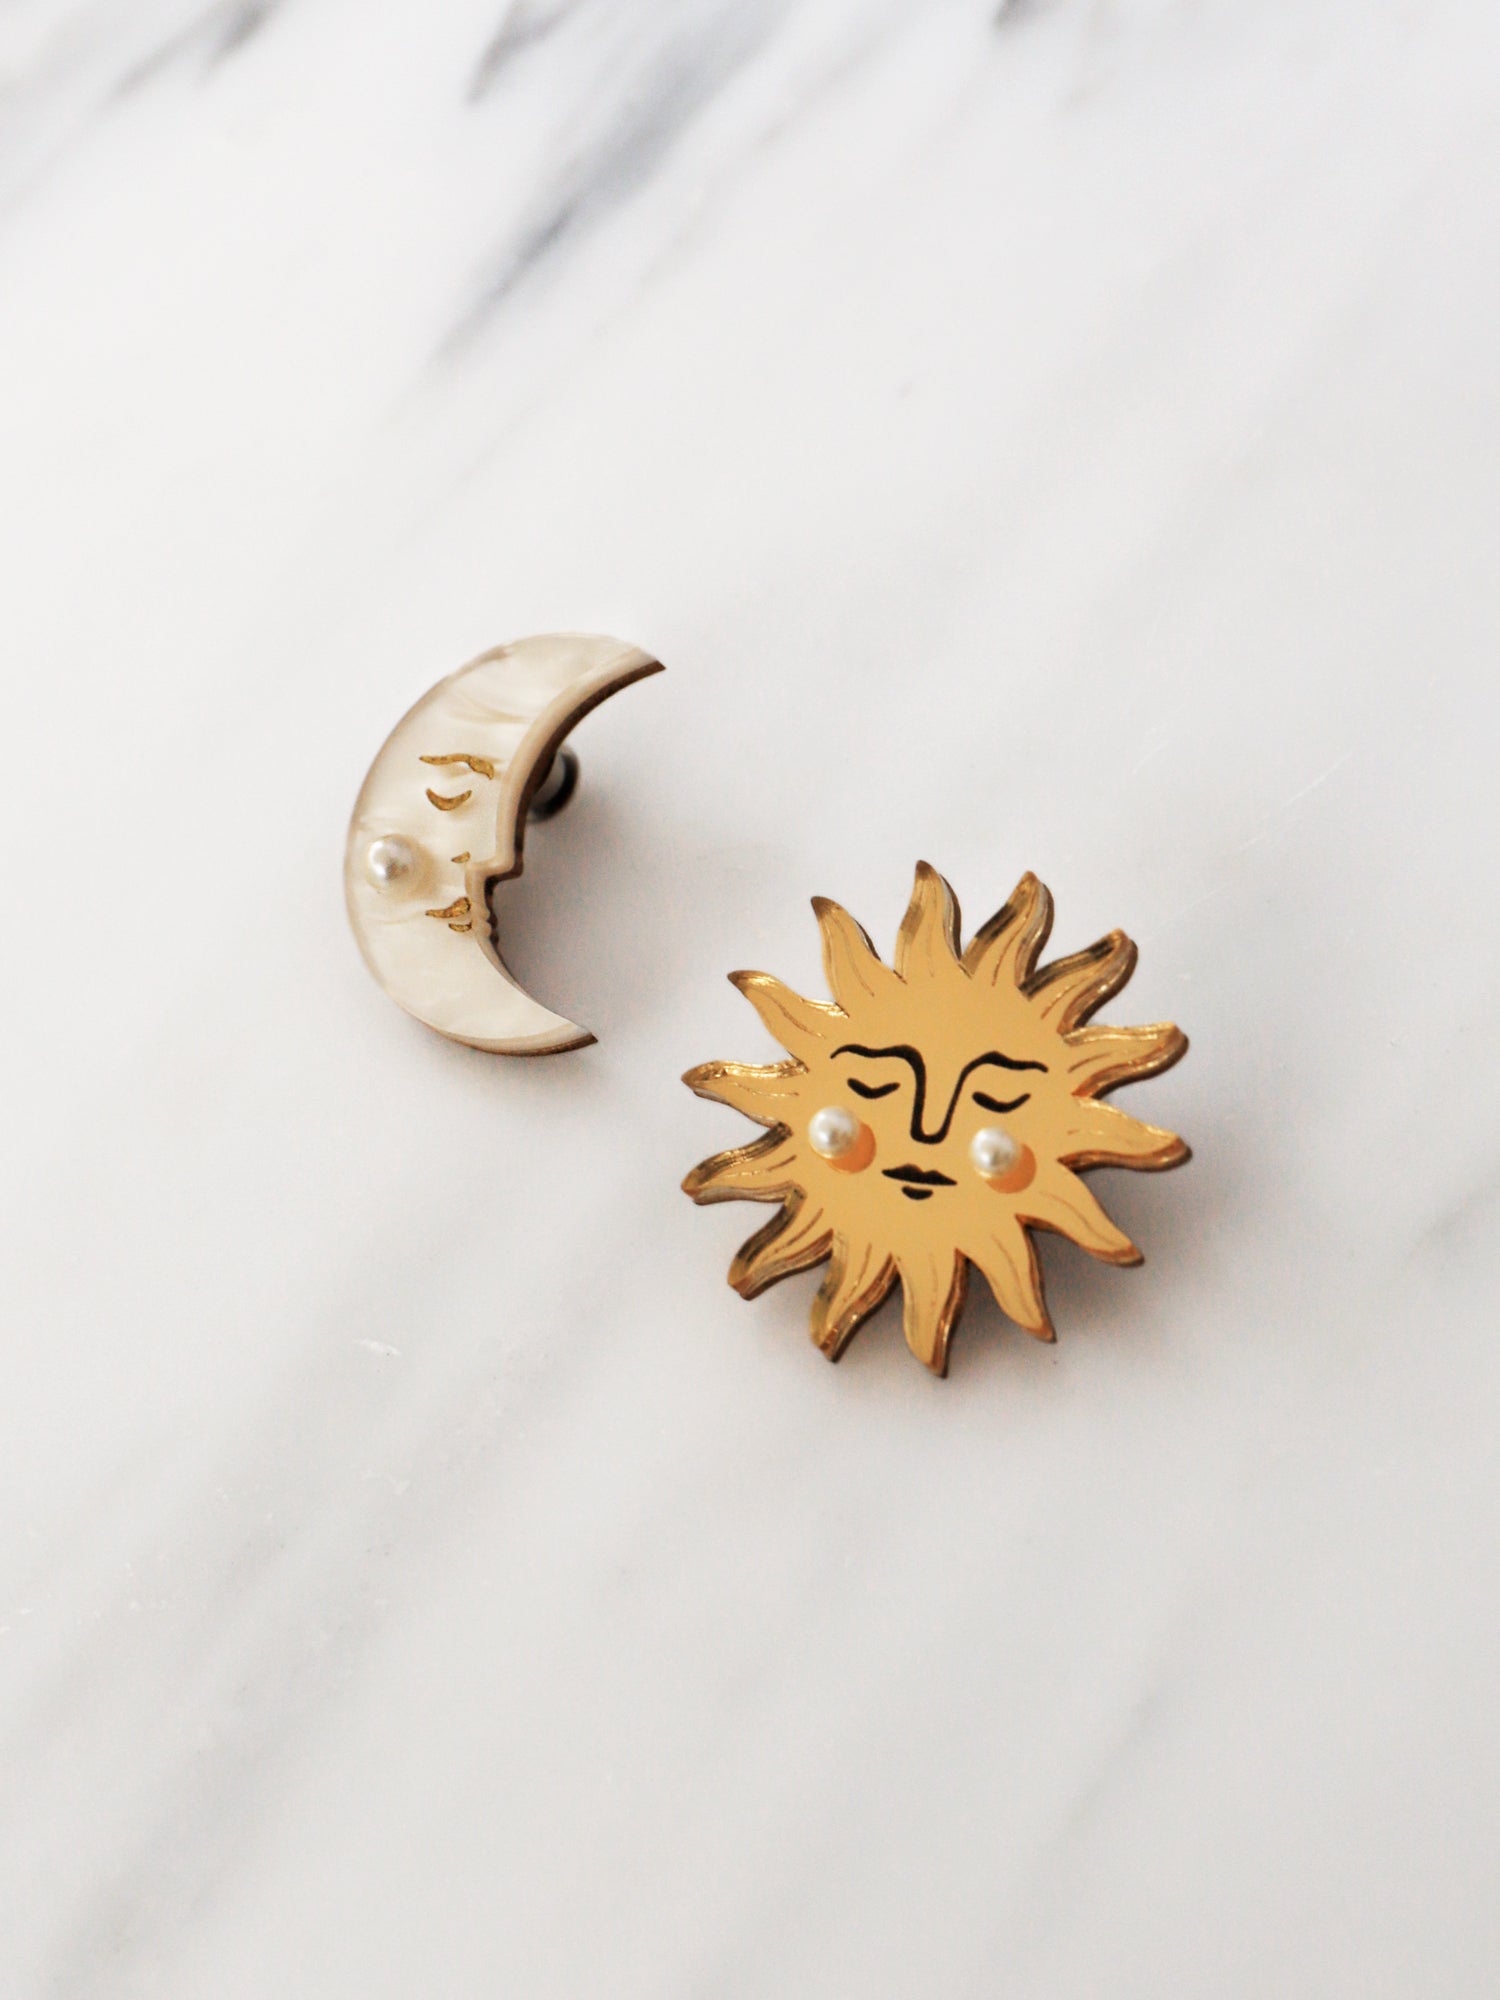 Sun & Moon Brooch Set. 2 brooches made with laser cut acrylic, Czech glass pearls and hand inked details. Handmade in the UK by Wolf & Moon.